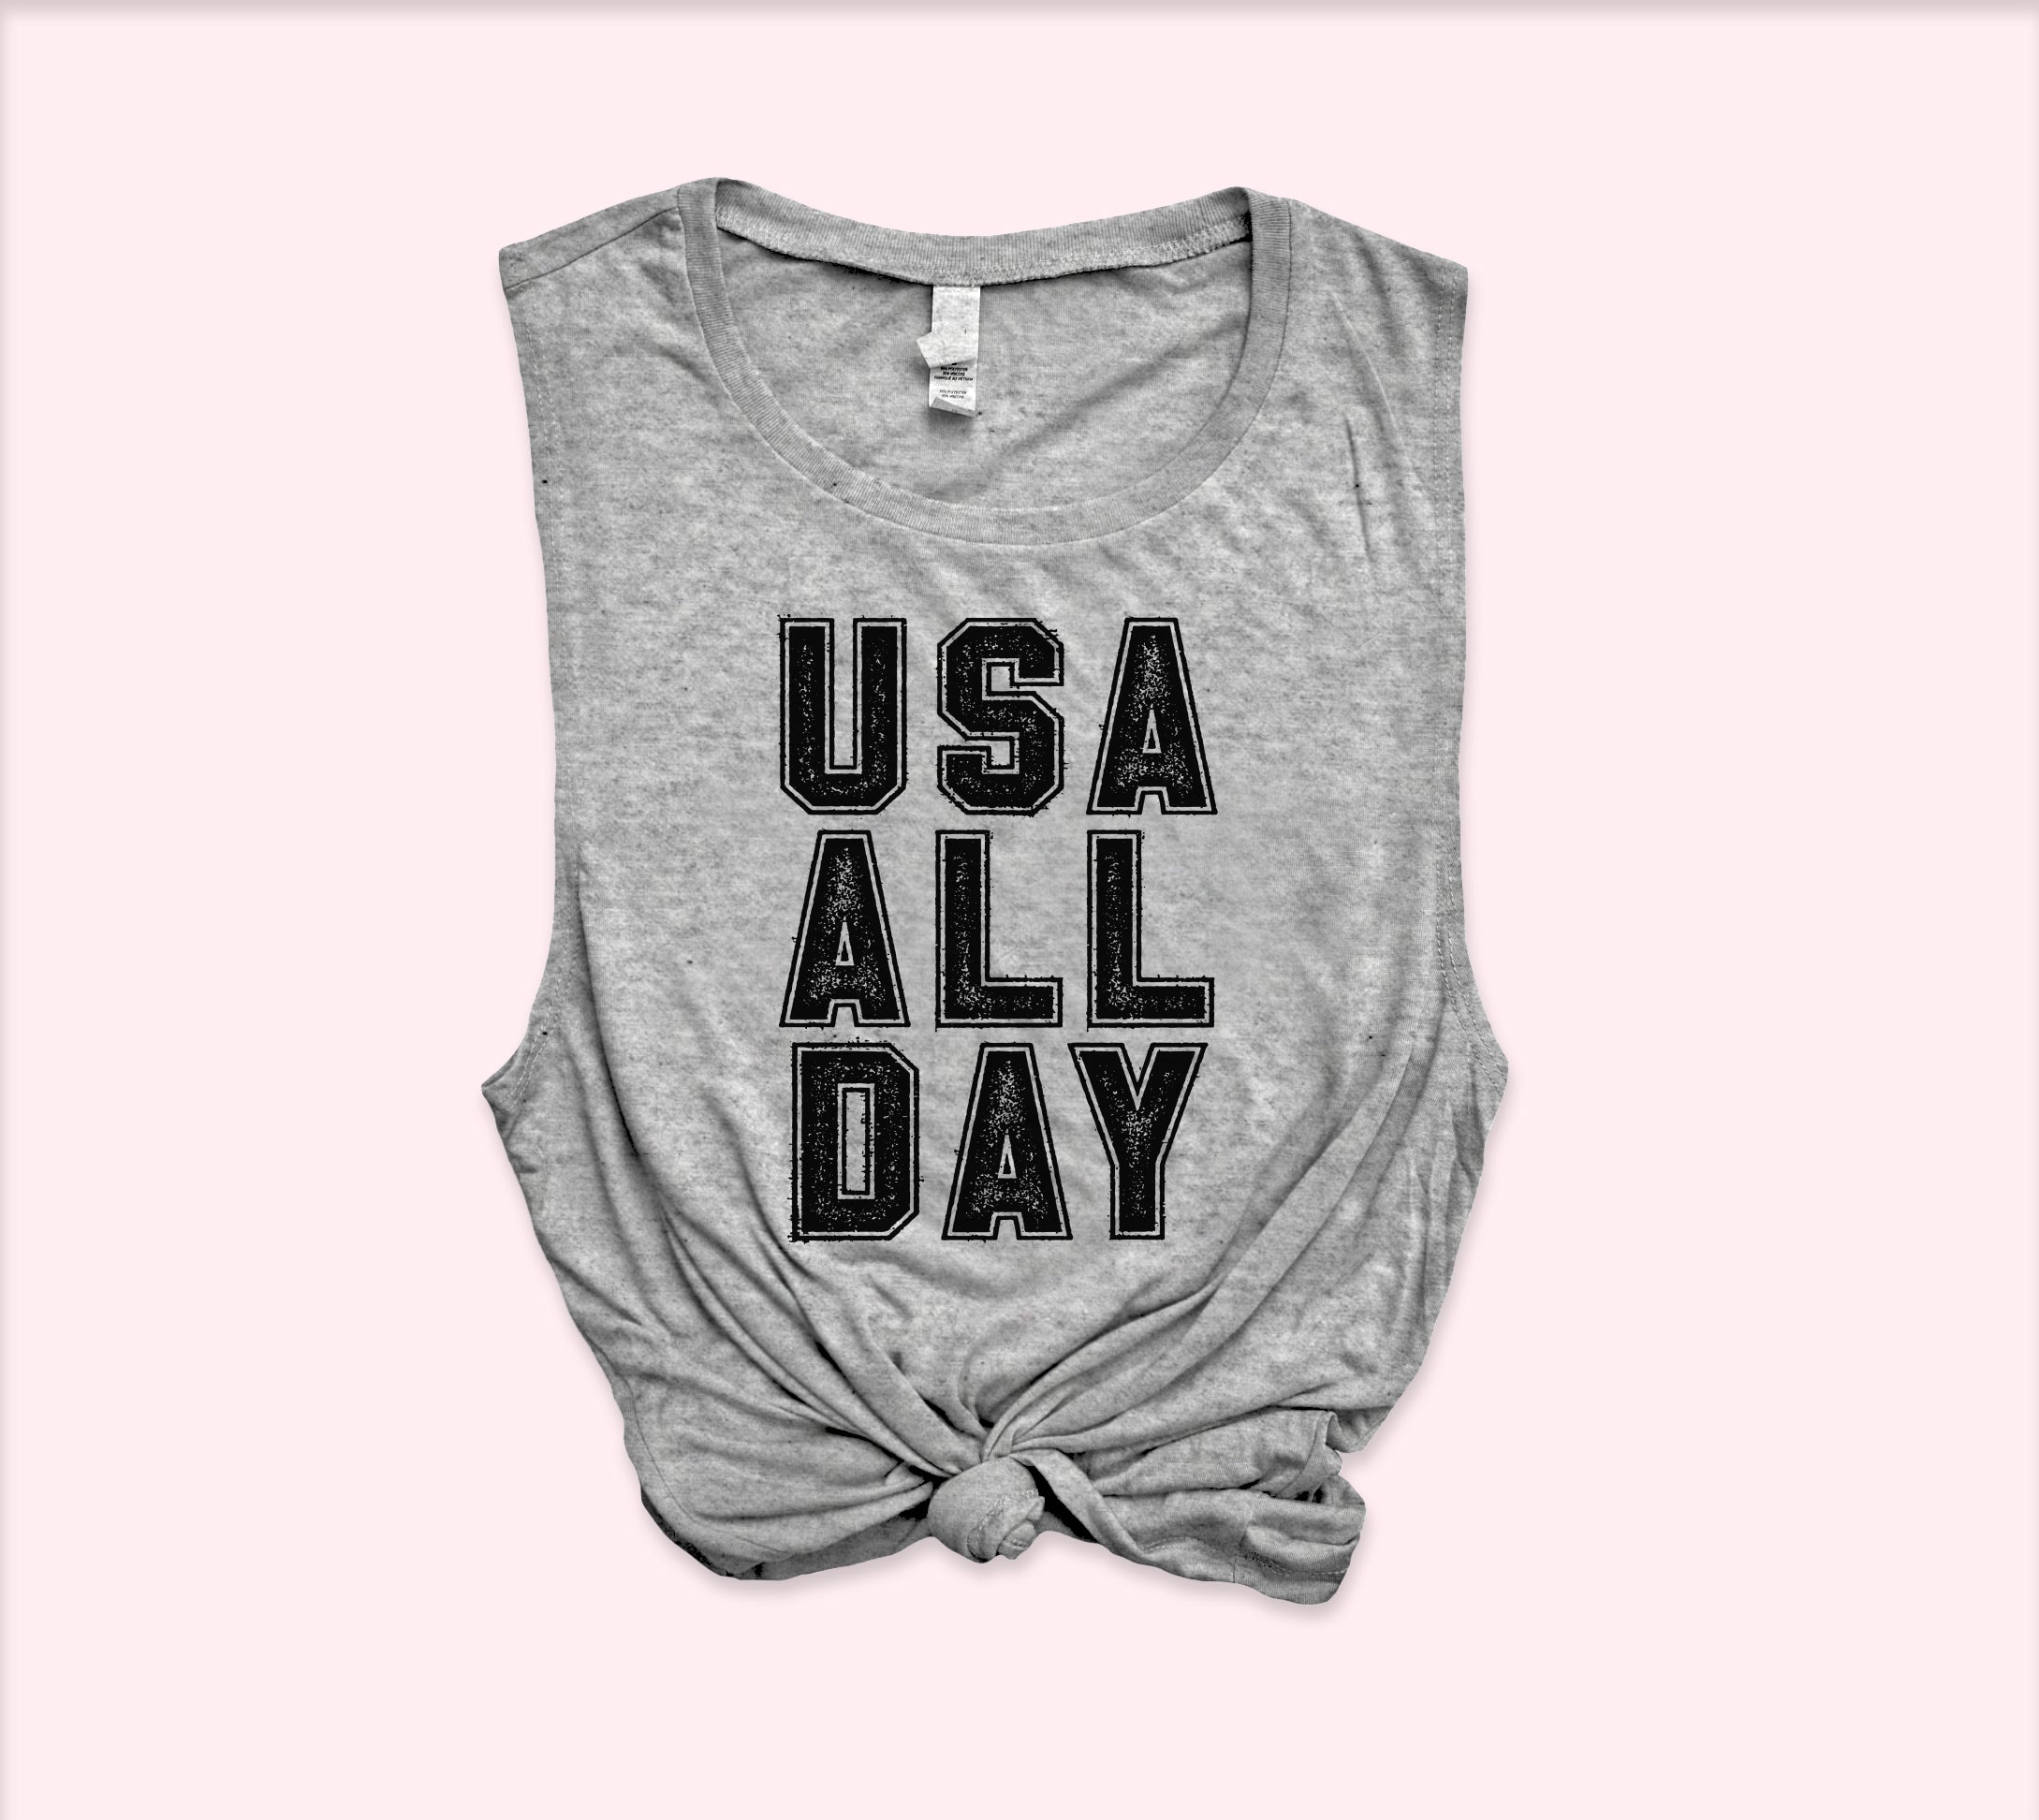 Usa All Day Muscle Tank